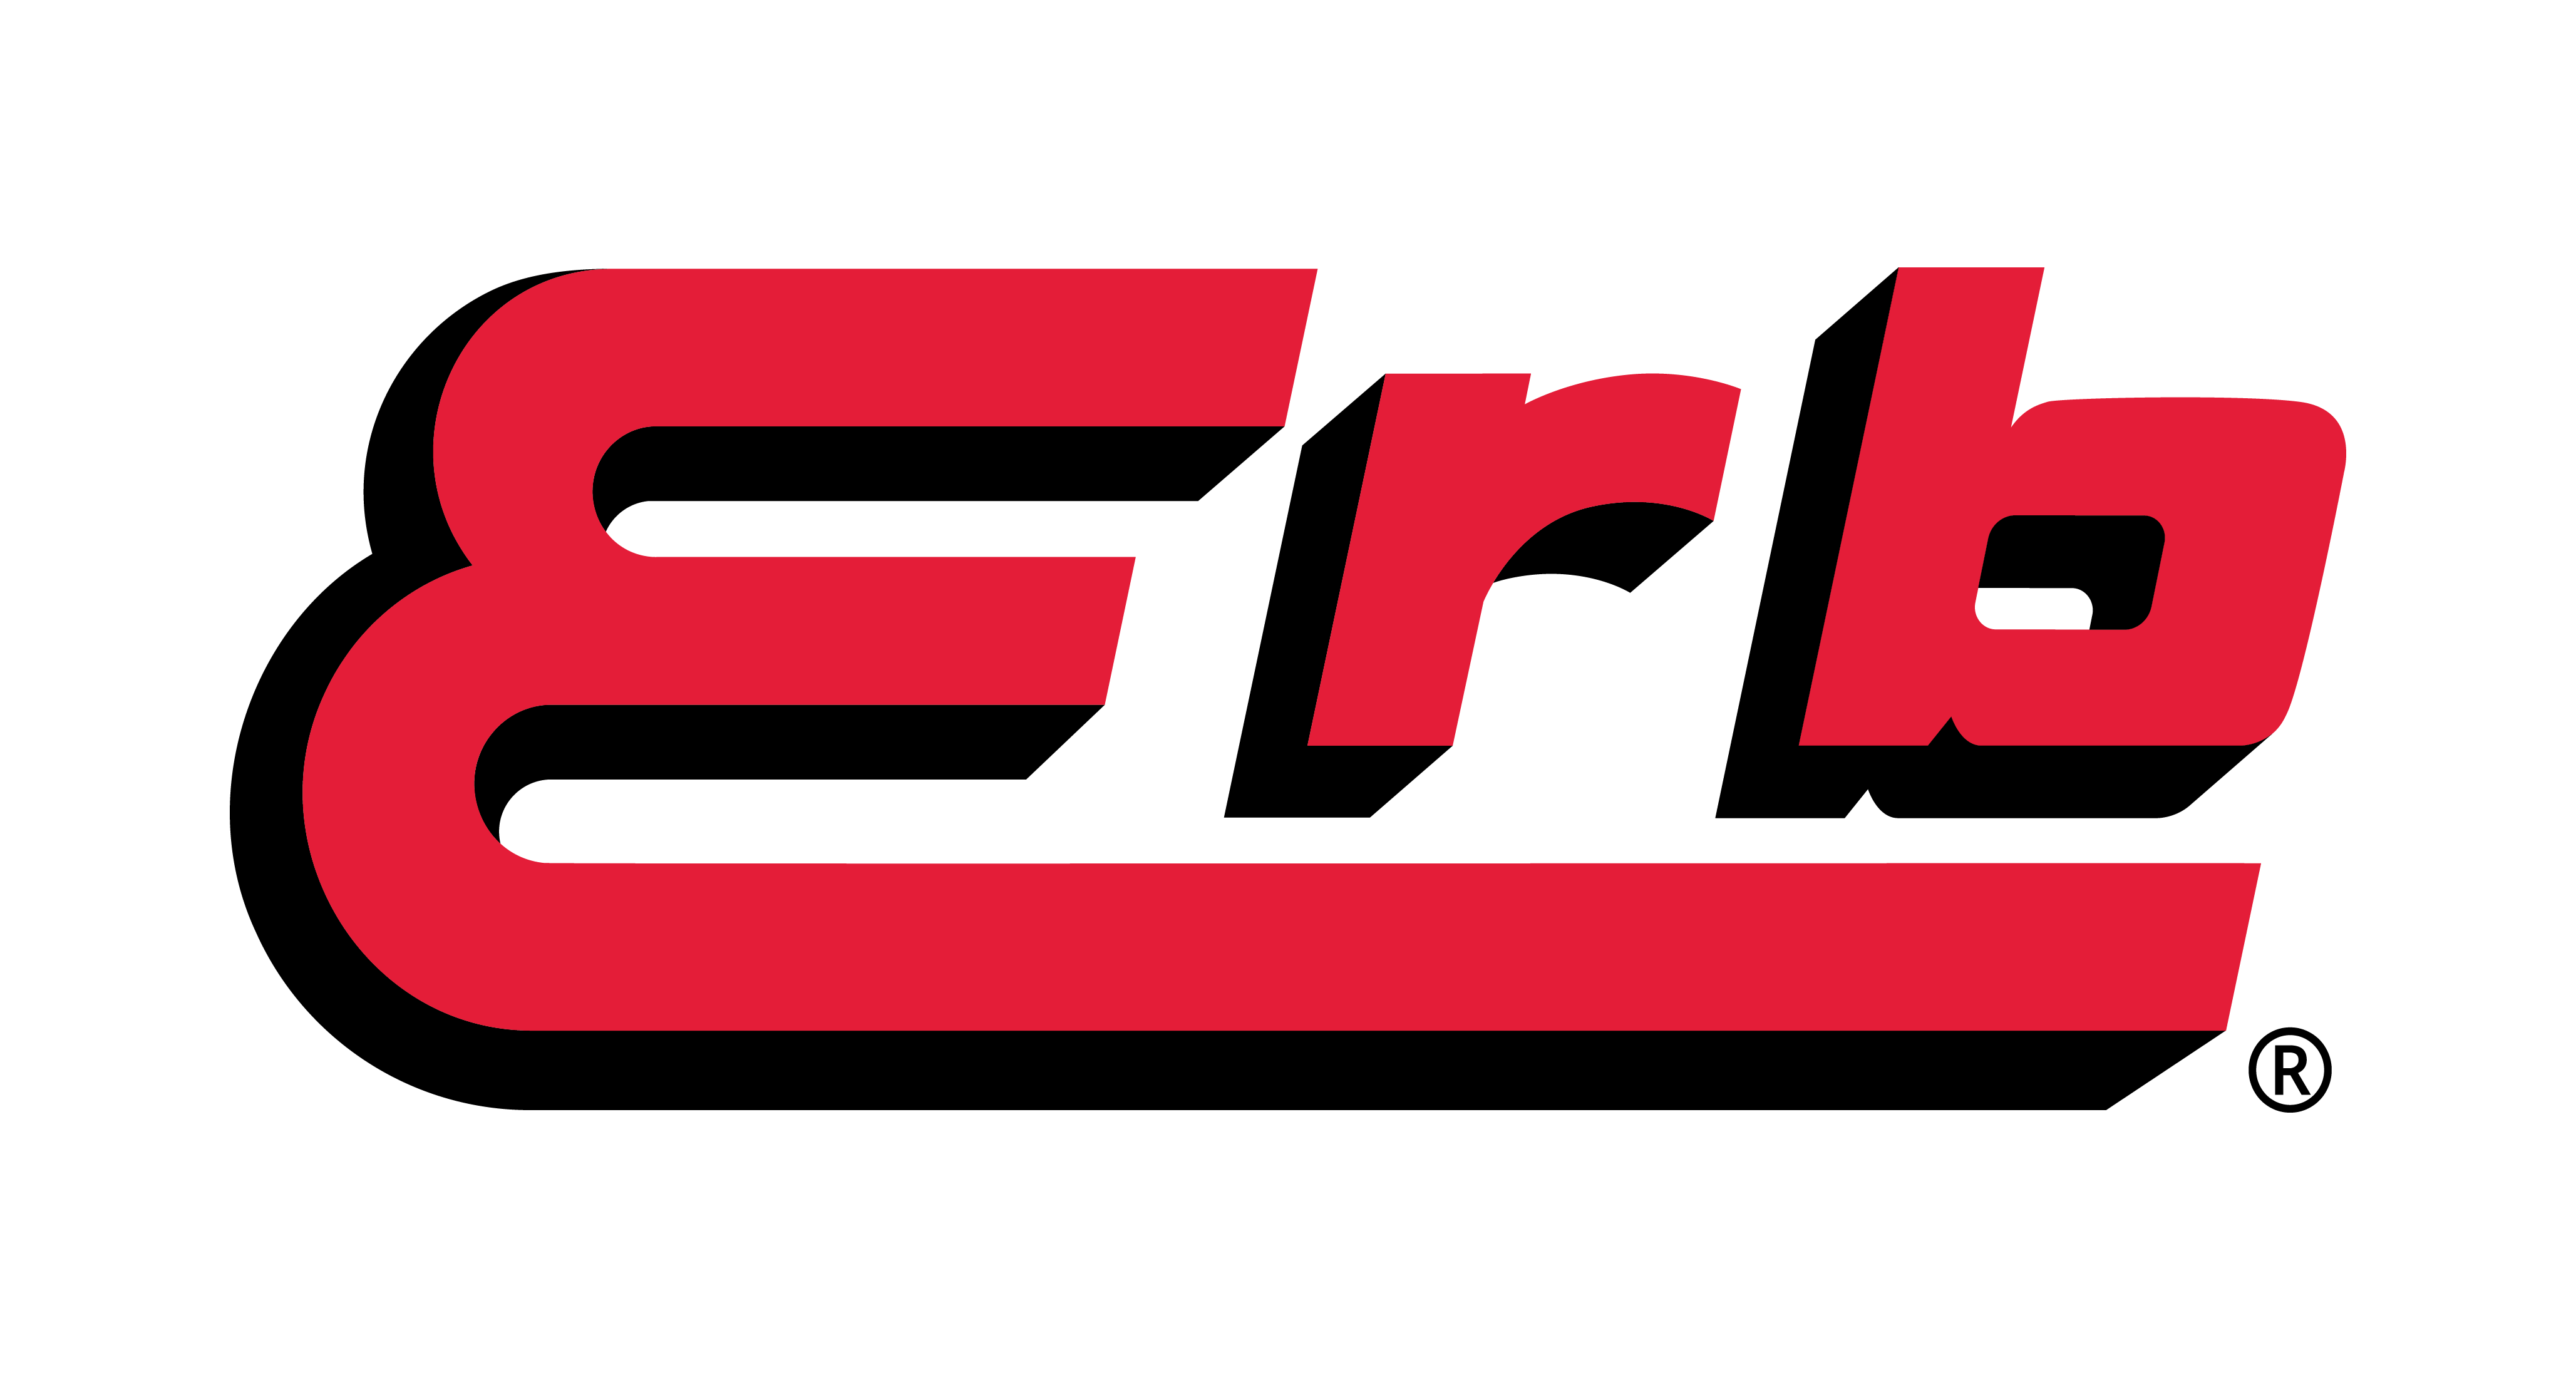 Erb Group of Companies